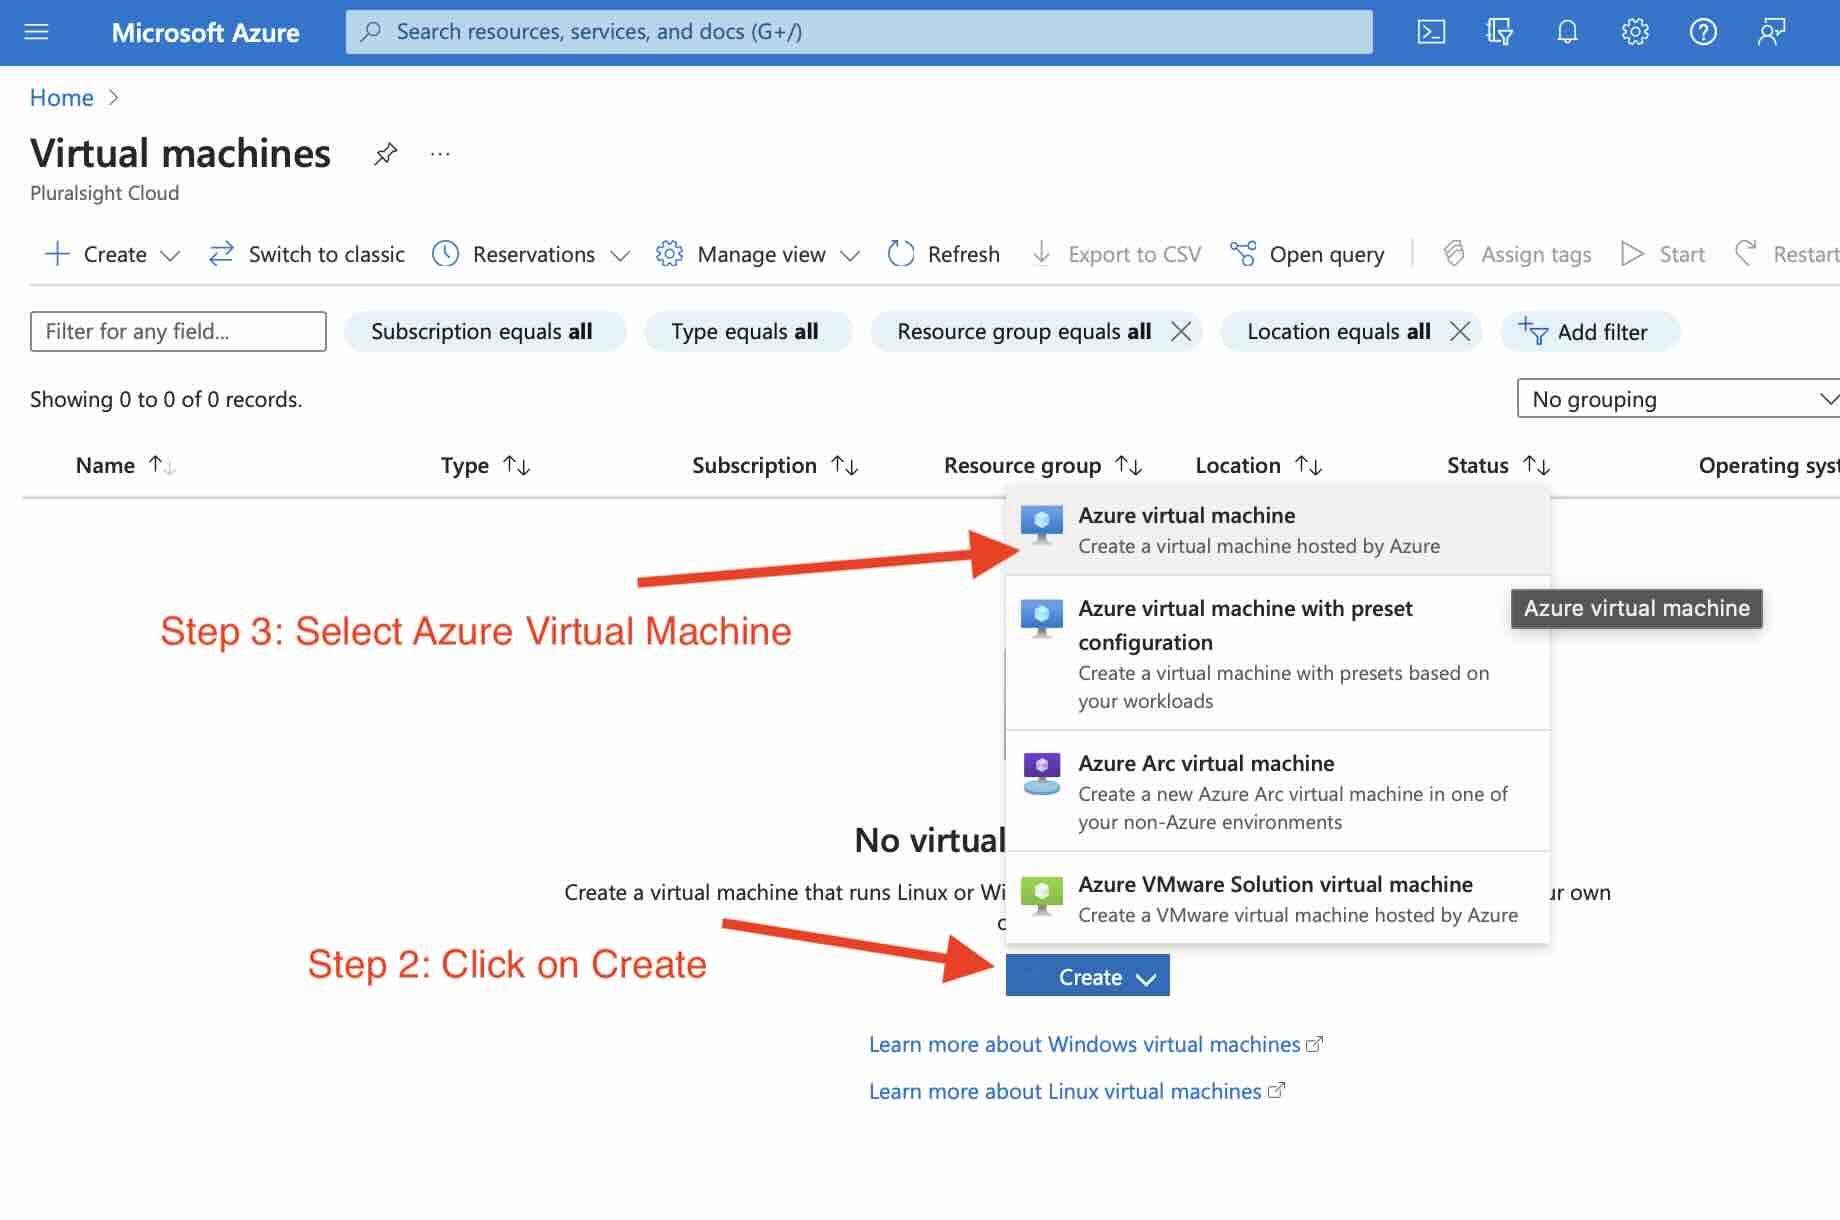 Step 2 - Click on Create and Select Azure Virtual Machine